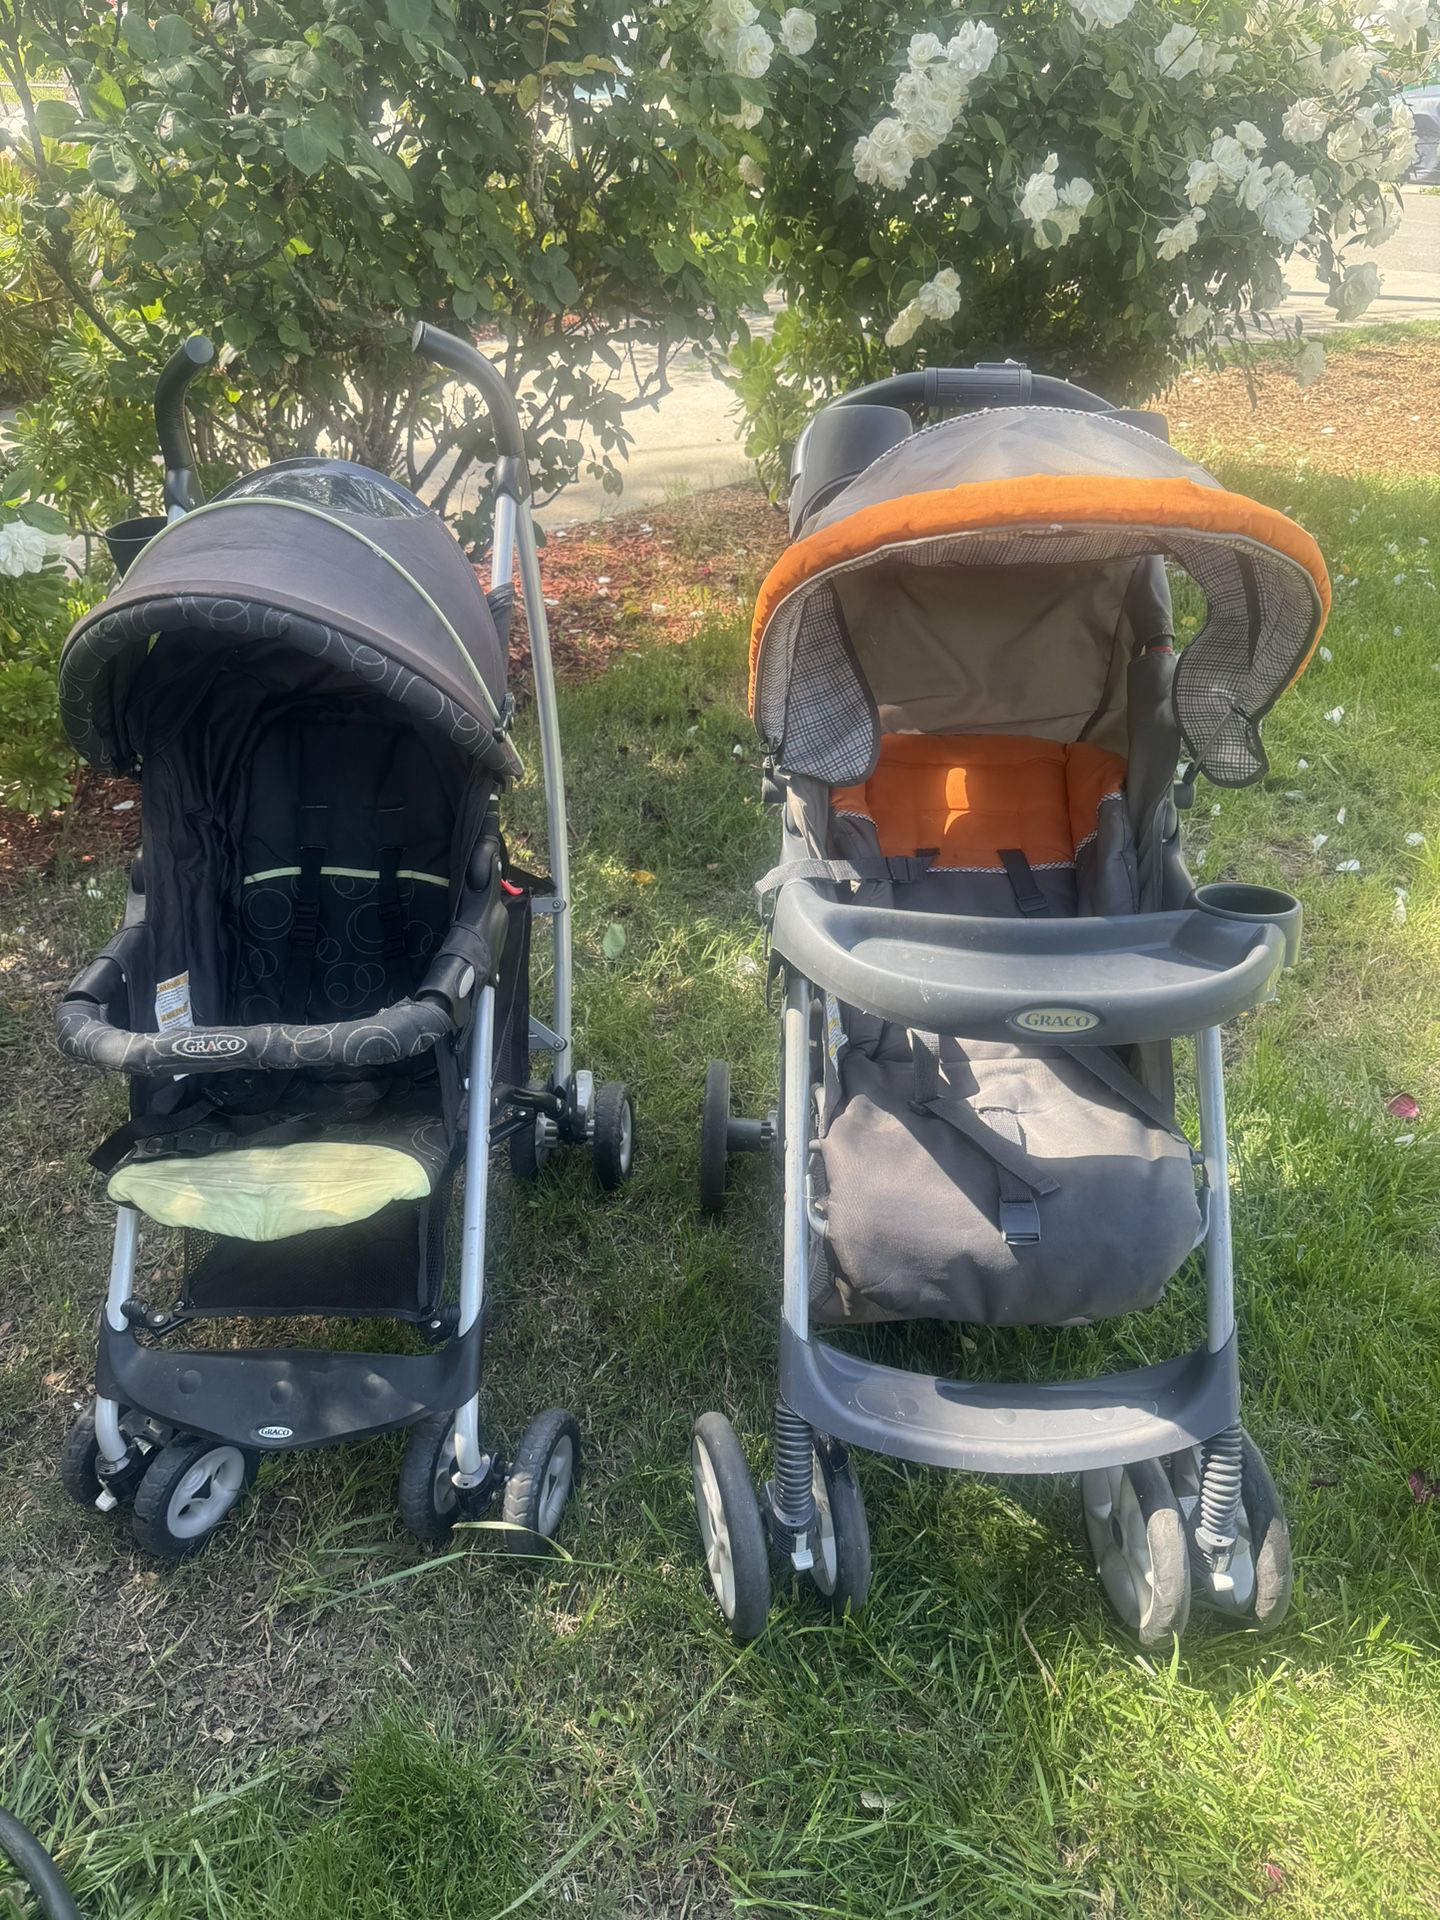 2 Strollers $15 and $25; Both For $35